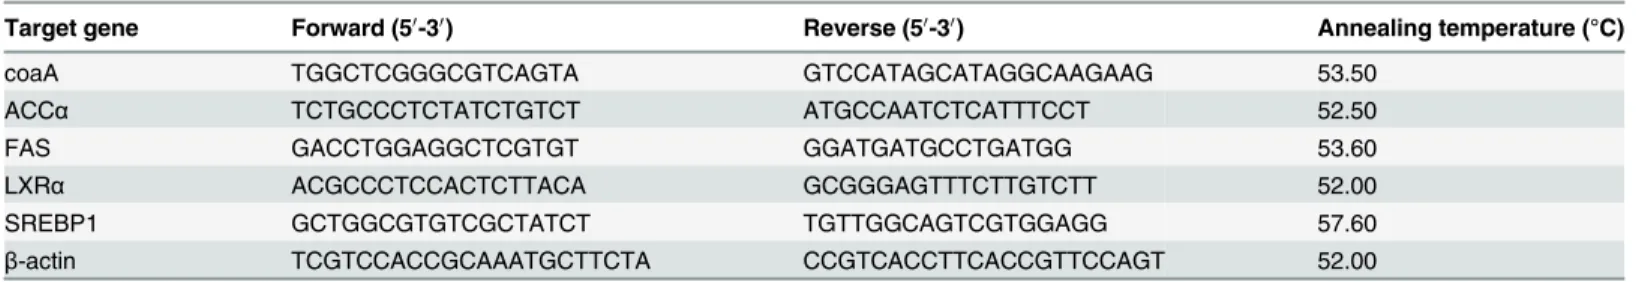 Table 2. Nucleotide sequences of the primers used to assay gene expression by real-time PCR.